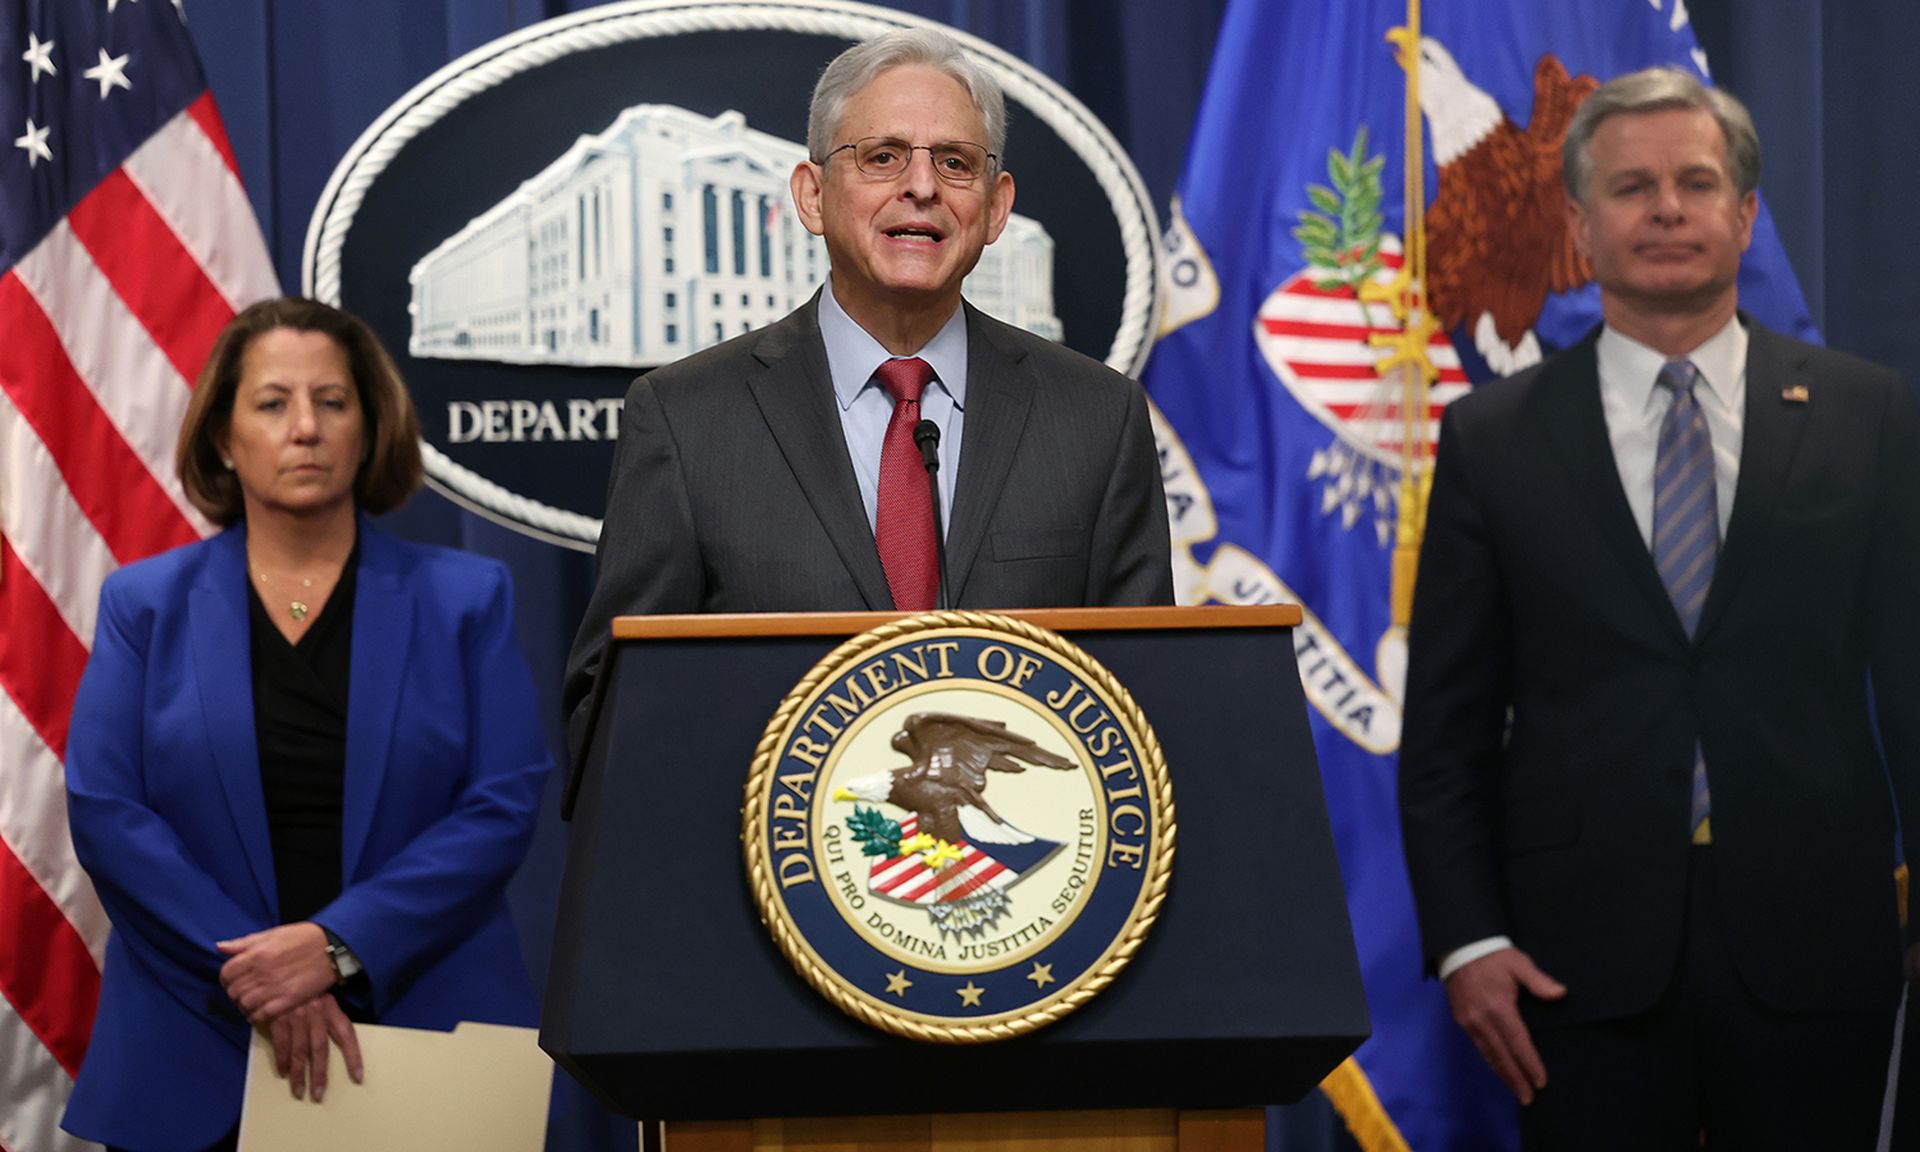 WASHINGTON, DC &#8211; JANUARY 26: U.S. Attorney General Merrick Garland (C), joined by Assistant Attorney General Lisa Monaco and Director of the Federal Bureau of Investigation (FBI) Christopher Wray, delivers remarks on an international ransomware enforcement action at the U.S. Justice Department on January 26, 2023 in Washington, DC. The Justic...